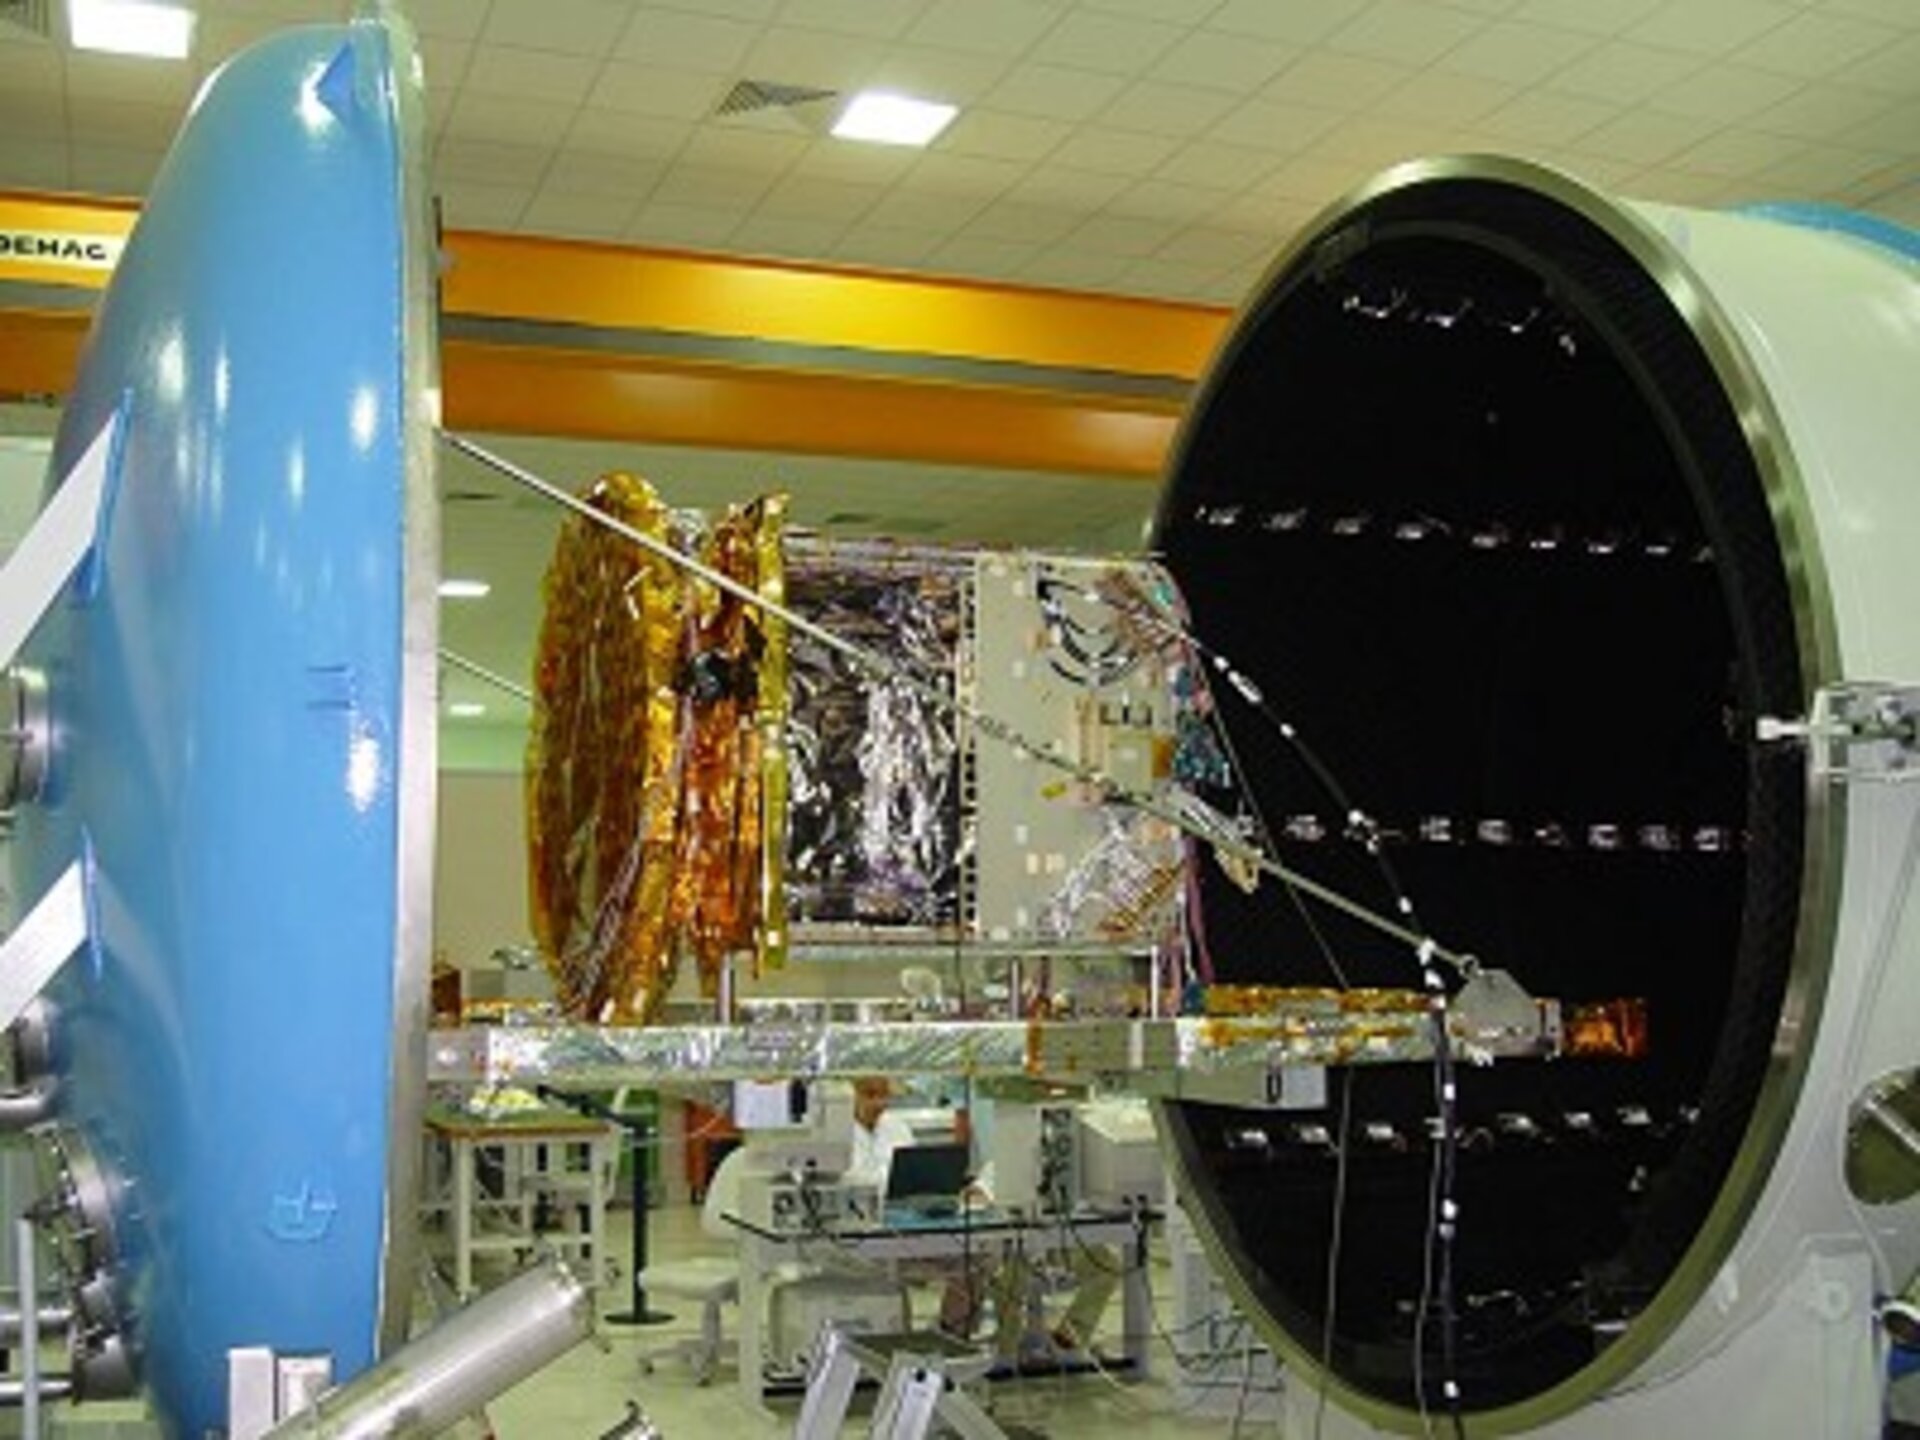 GSTB-V2/B payload module enters the vacuum chamber